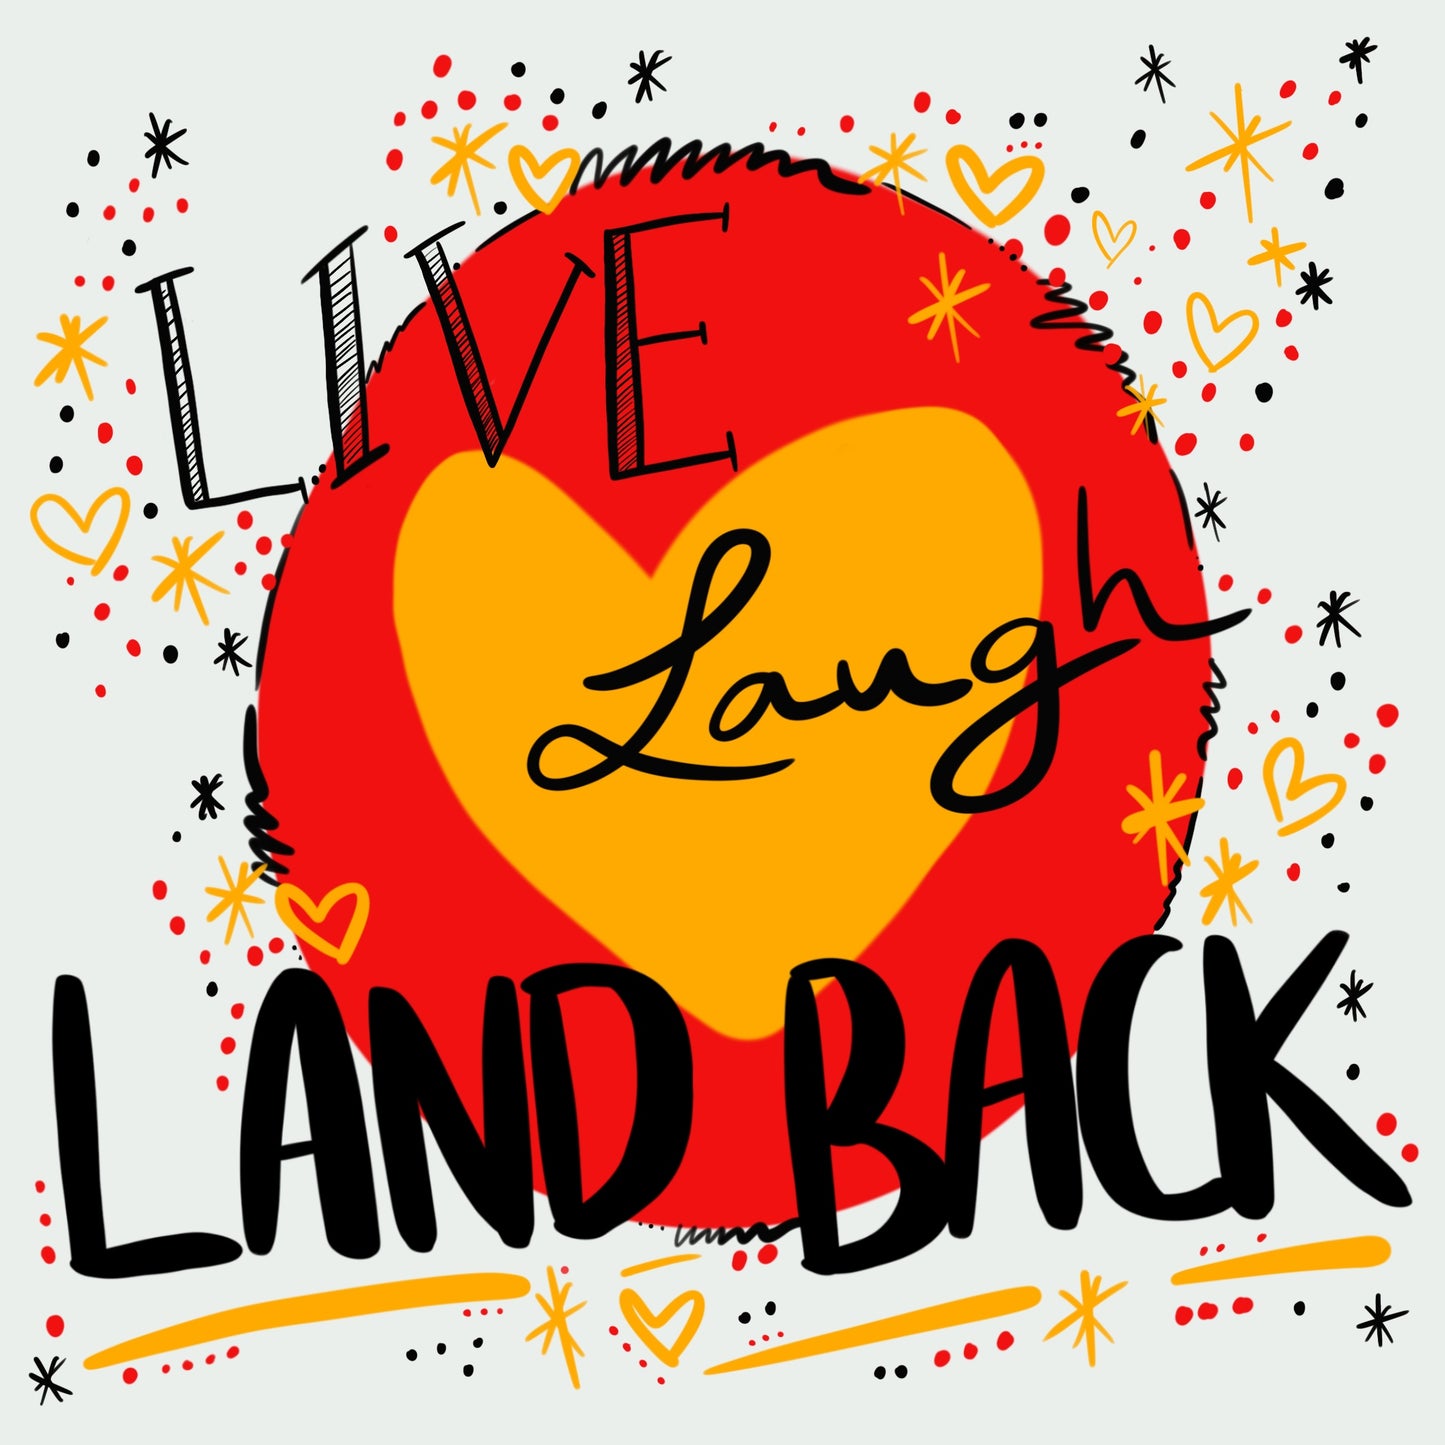 ‘live laugh land back’ written in black with a yellow heart and red circle behind. The background is white with small dots, squiggles, stars and hearts dotted around the image in red, yellow and black.